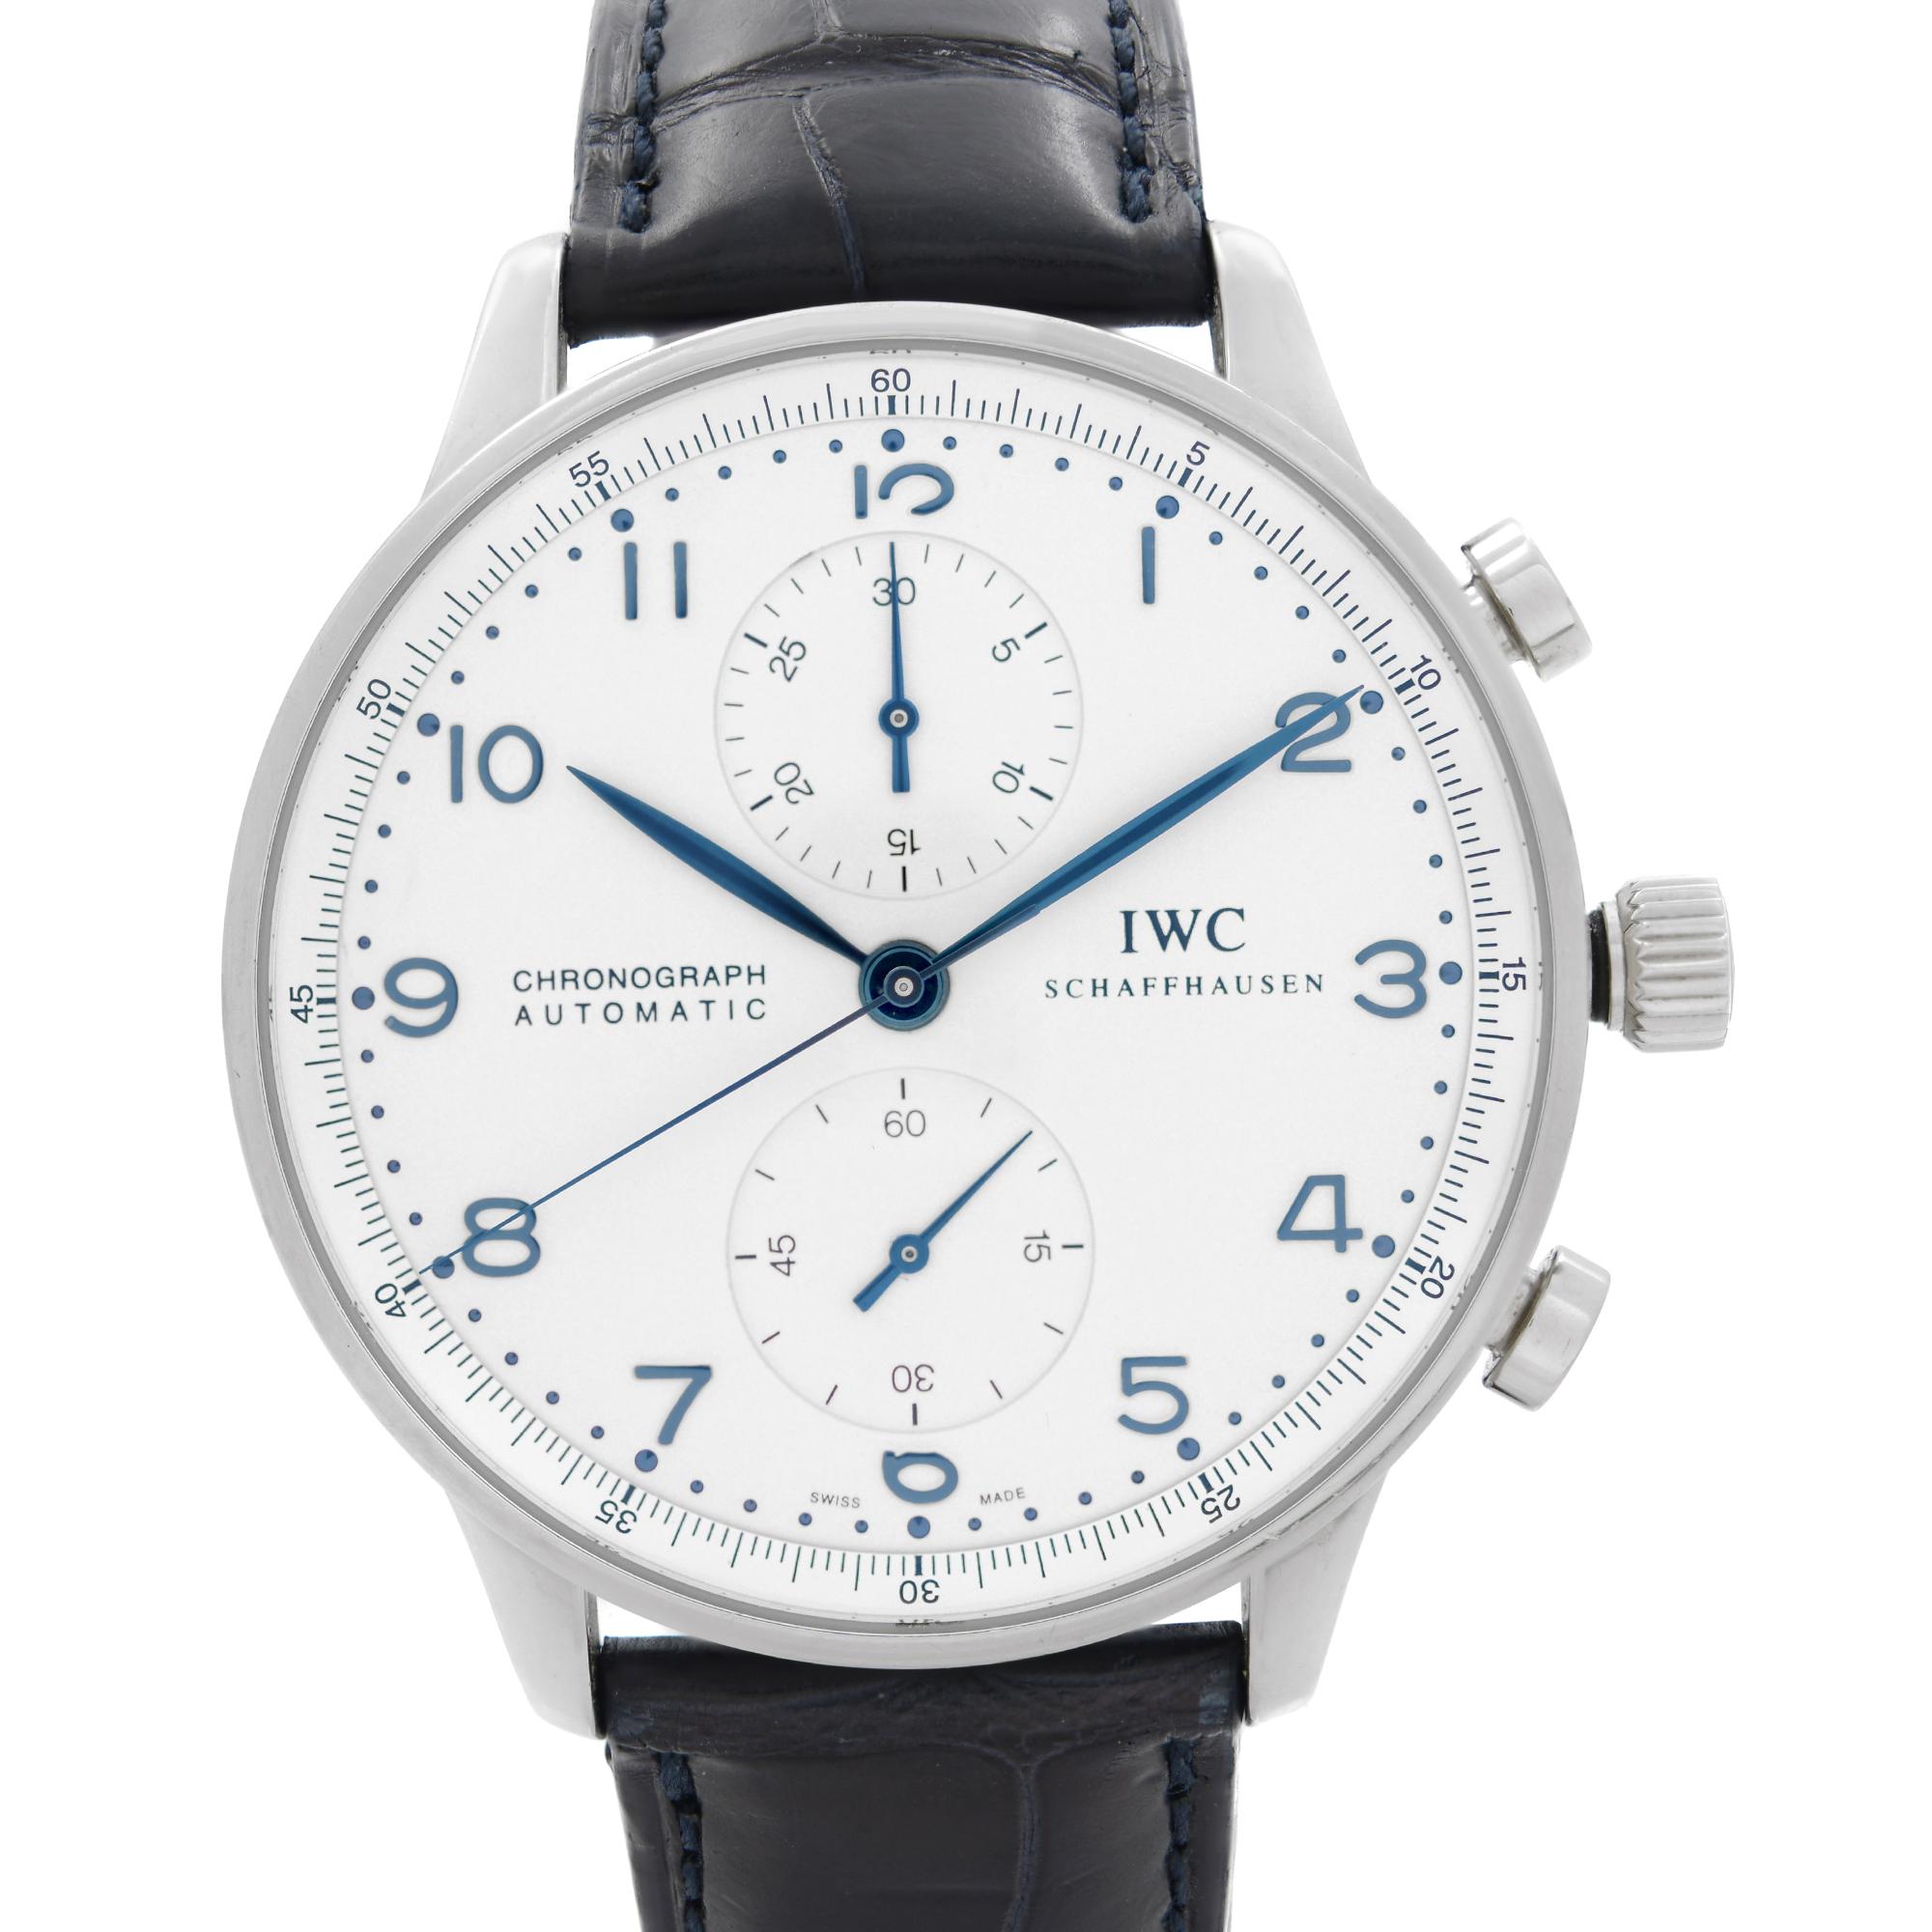 Pre Owned IWC Portugieser 41mm Steel Chronograph Silver Dial Automatic Men Watch IW371605. This Beautiful Timepiece is Powered by Mechanical (Automatic) Movement And Features: Round Stainless Steel Case with a Blue Alligator Leather Strap, Fixed